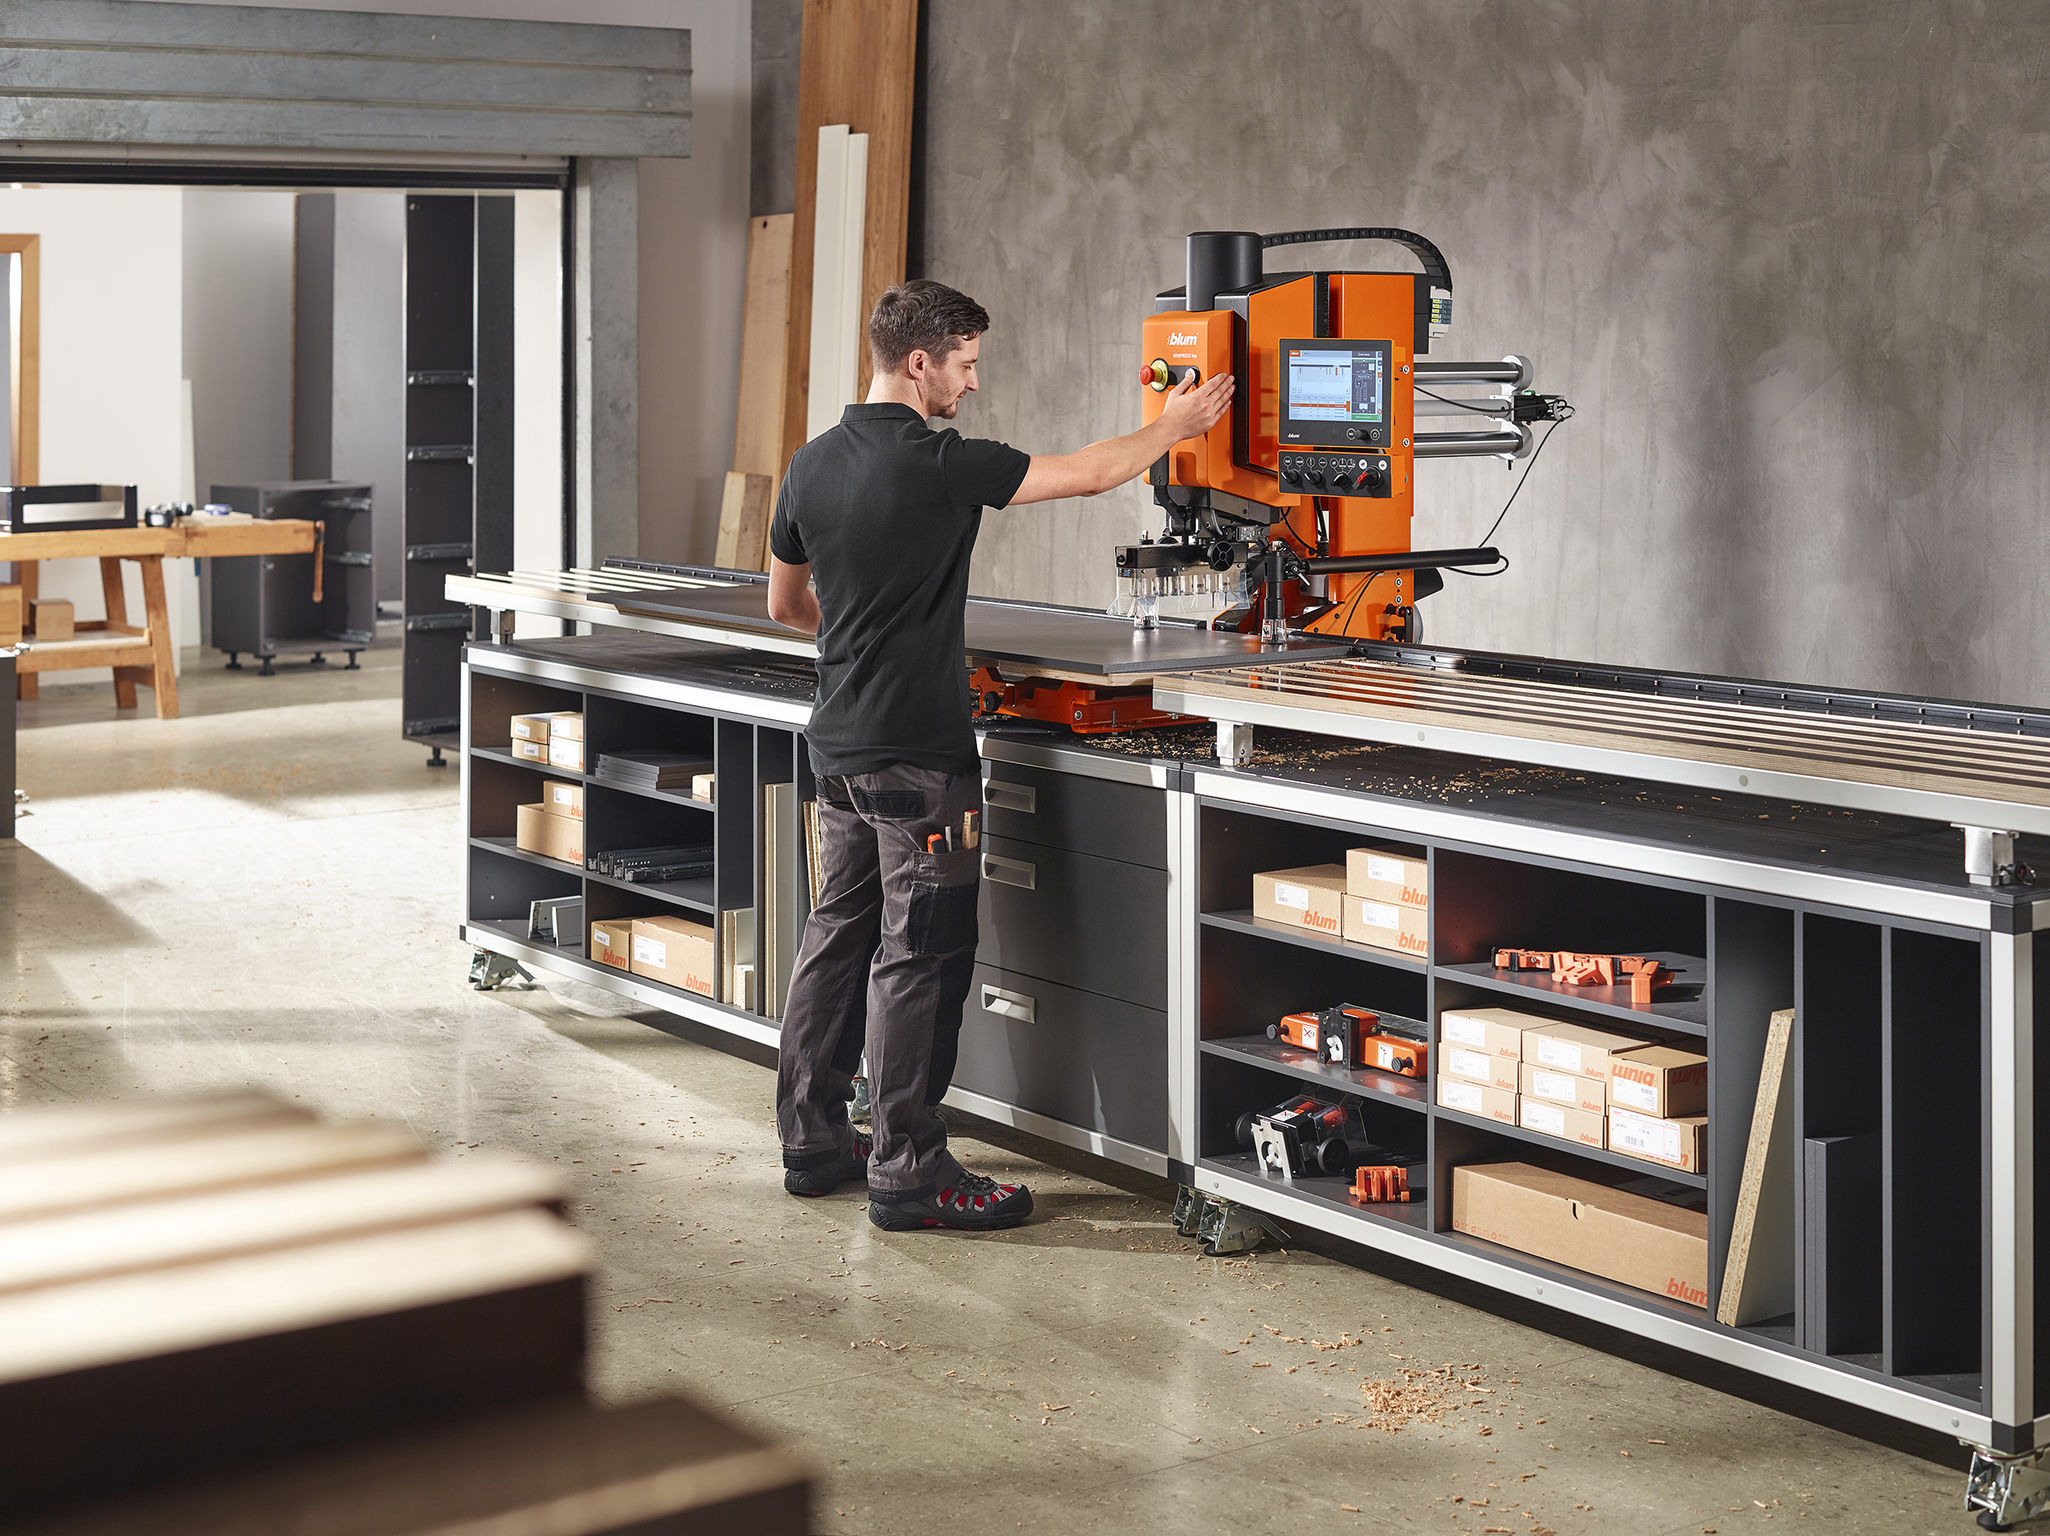 MINIPRESS top from Blum - well equipped for the future